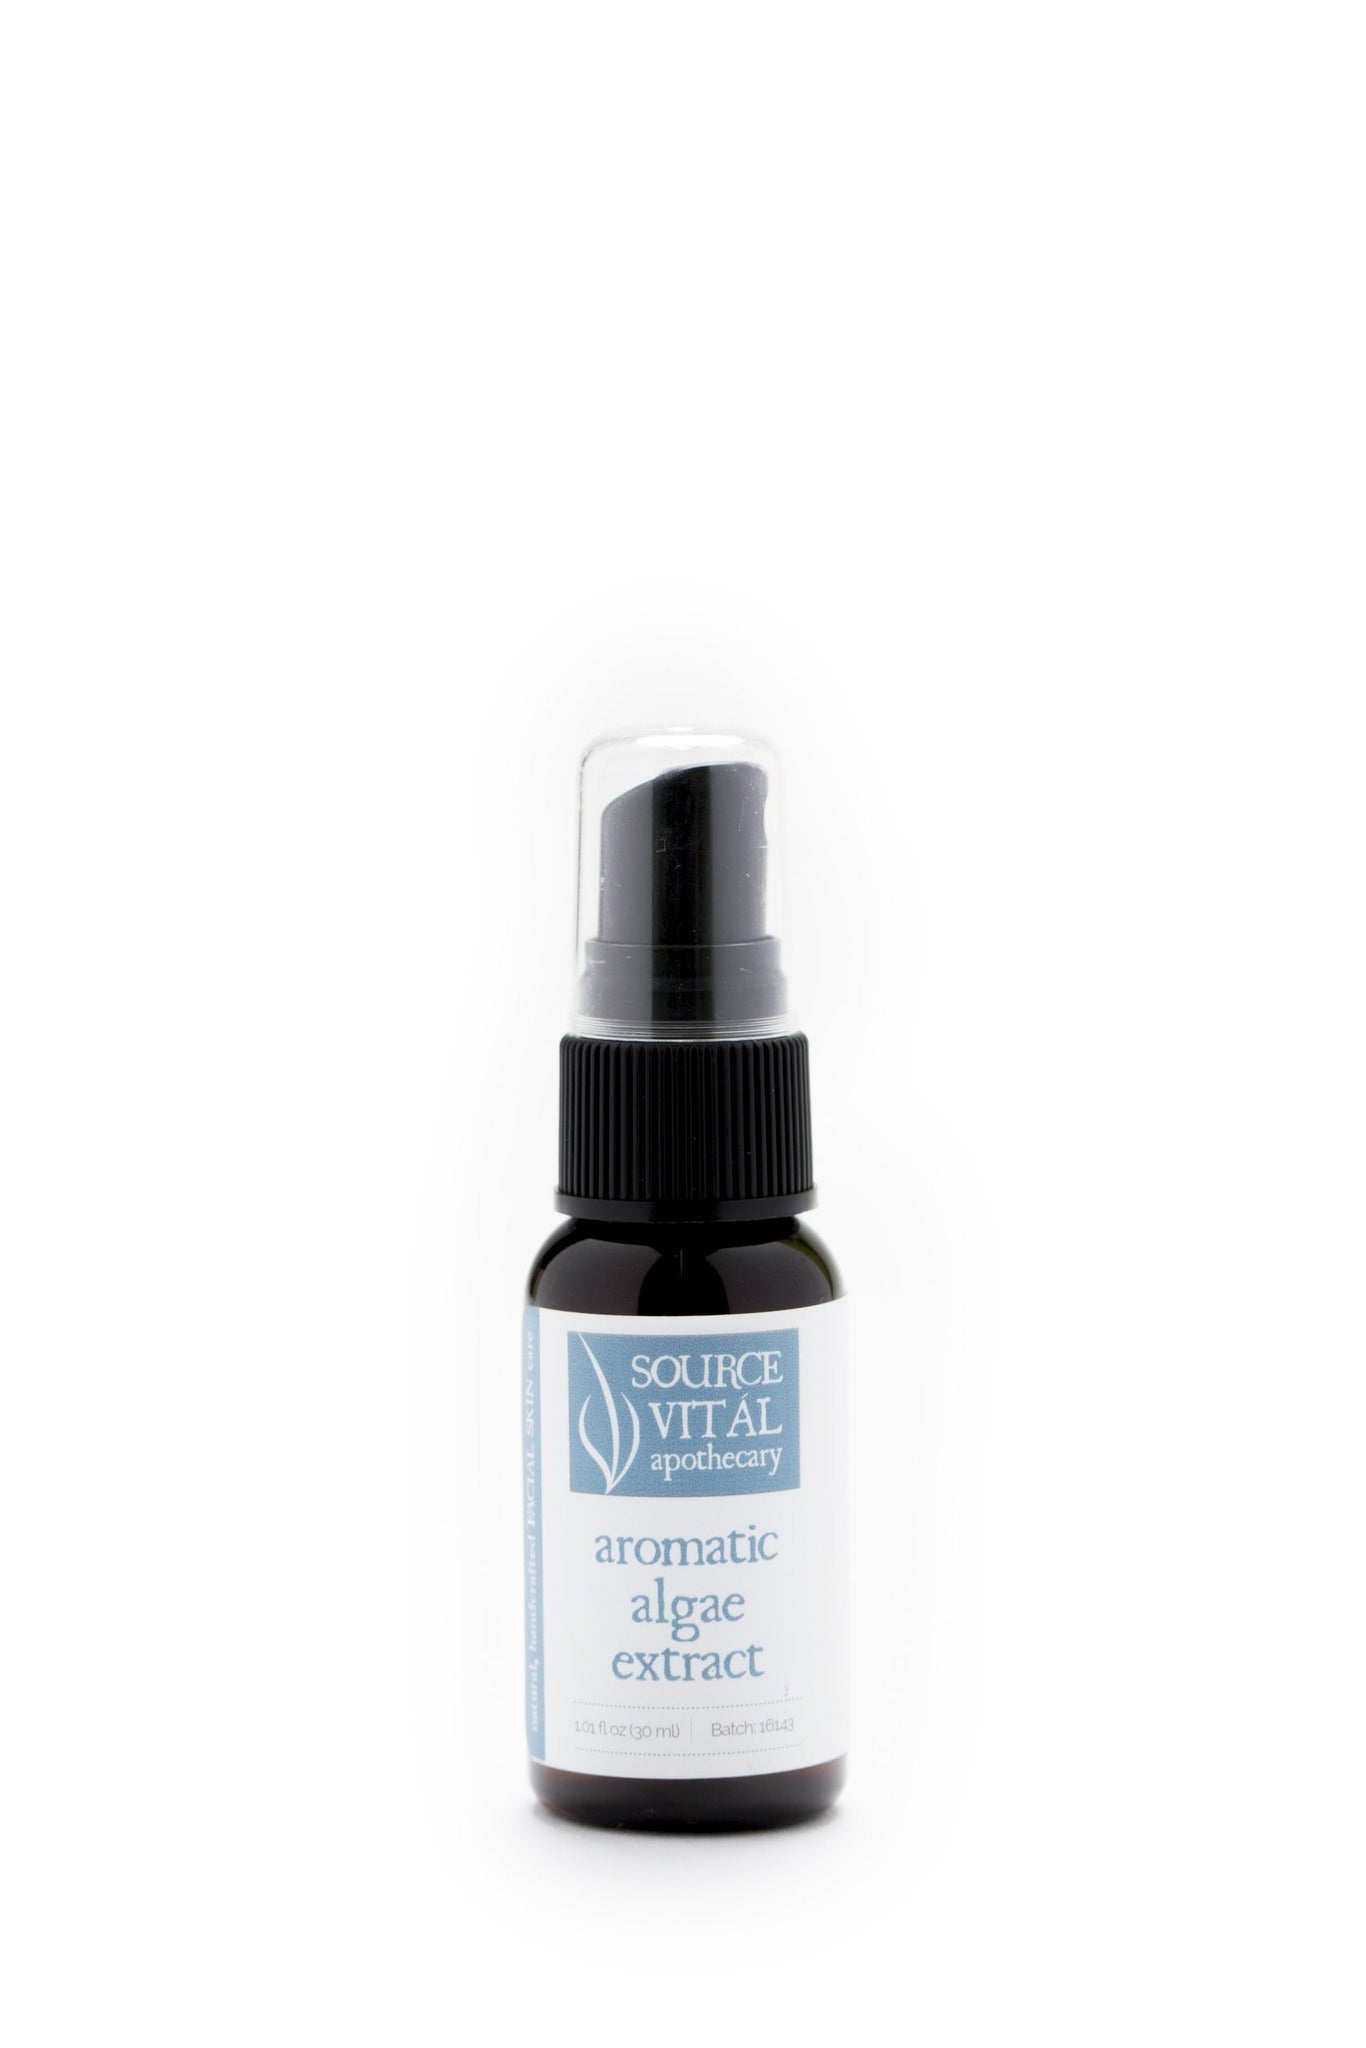 Source Vital Natural Aromatic Algae Extract Spray for skin issues